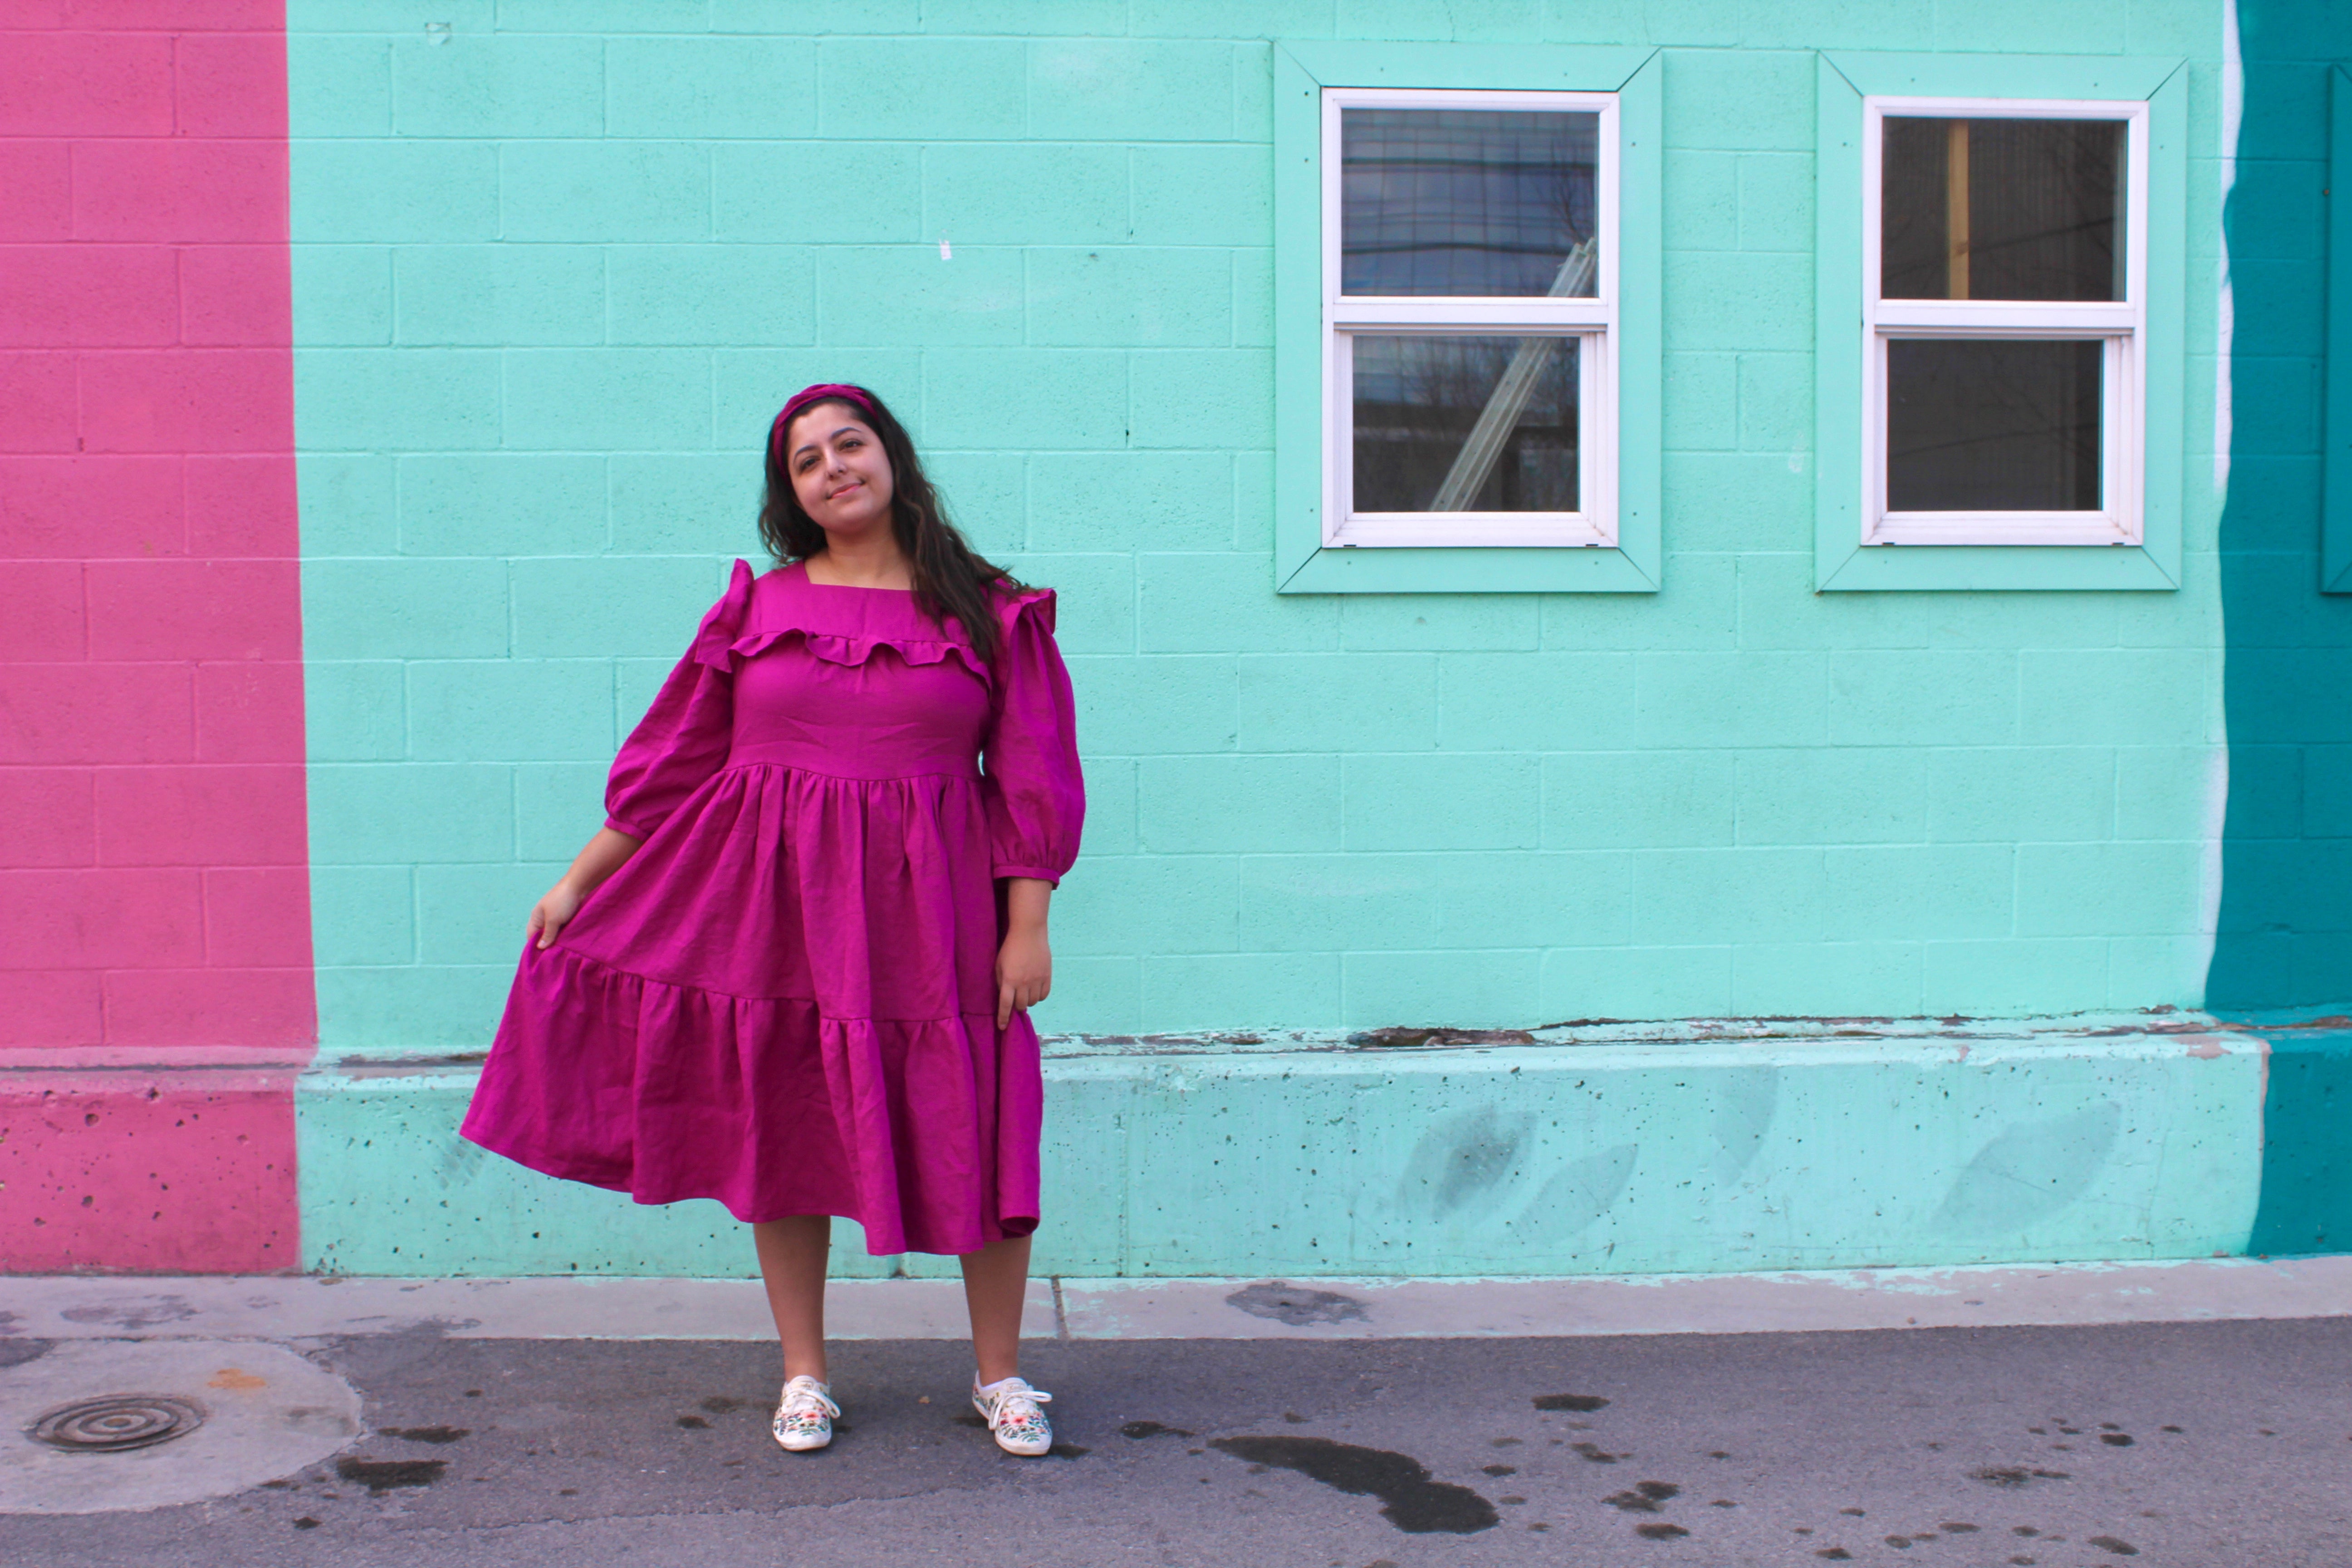 Romy wears a bright pink linen handmade dress, holding one side out slightly from her body to show the vlolume in the tiered skirt.  She is standing in front of a light blue, minty  painted wall.